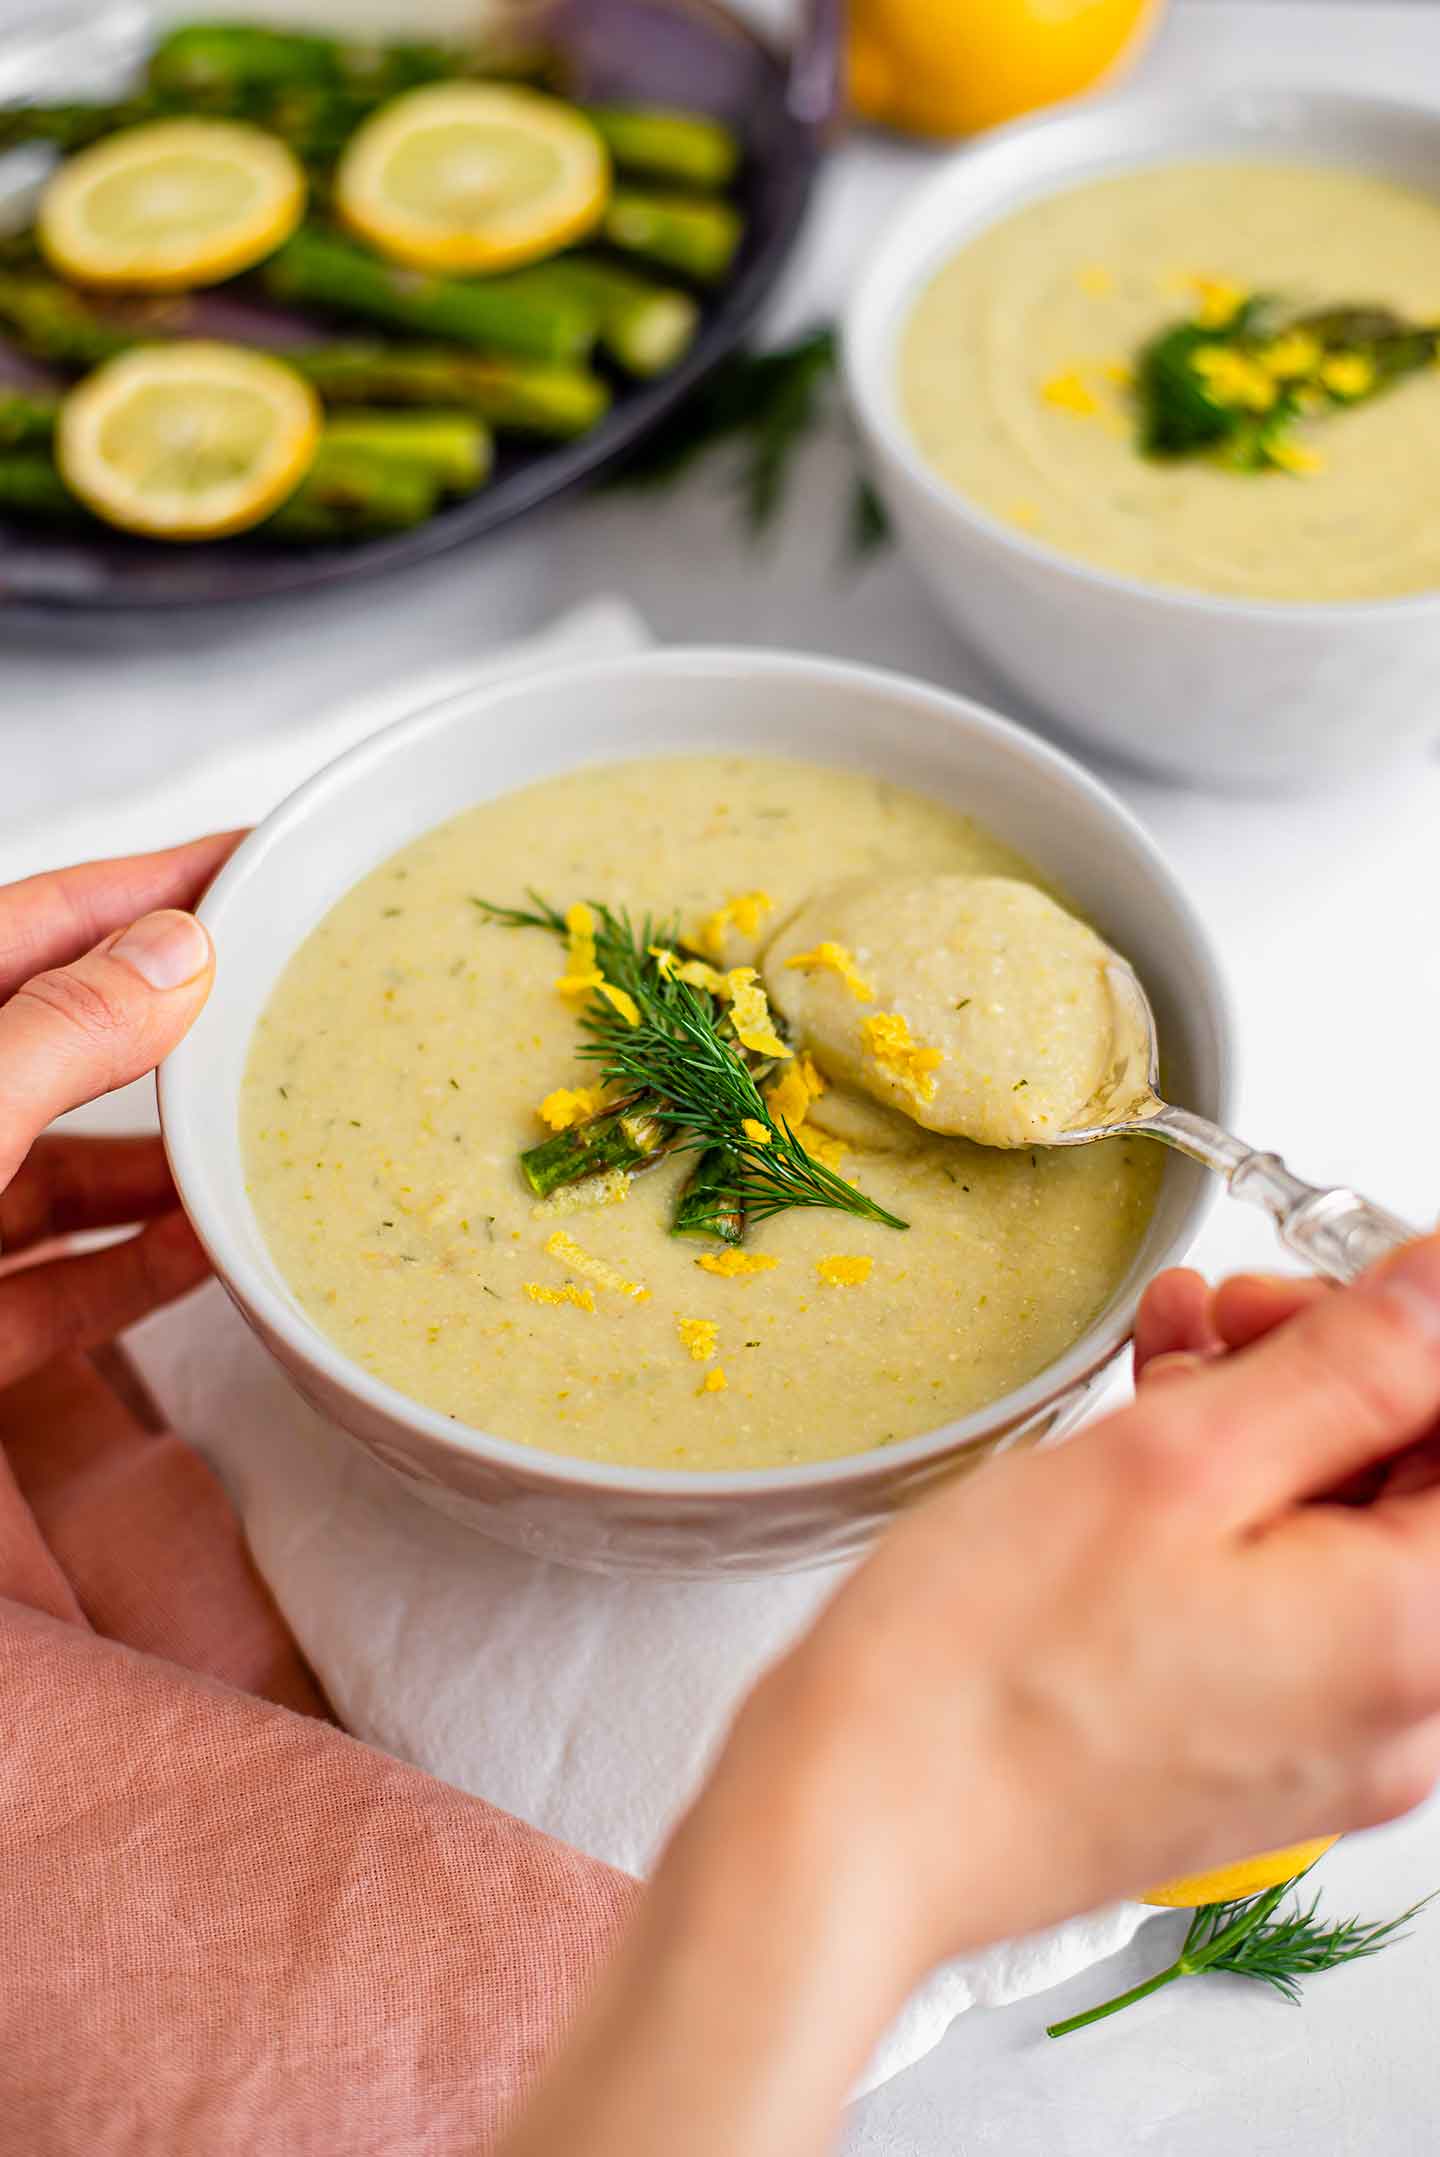 Side view of hand holding a spoon and scooping thick, creamy, lemon asparagus soup. The soup is garnished with asparagus, lemon zest, and dill. More asparagus spears and another bowl of soup are in the background.